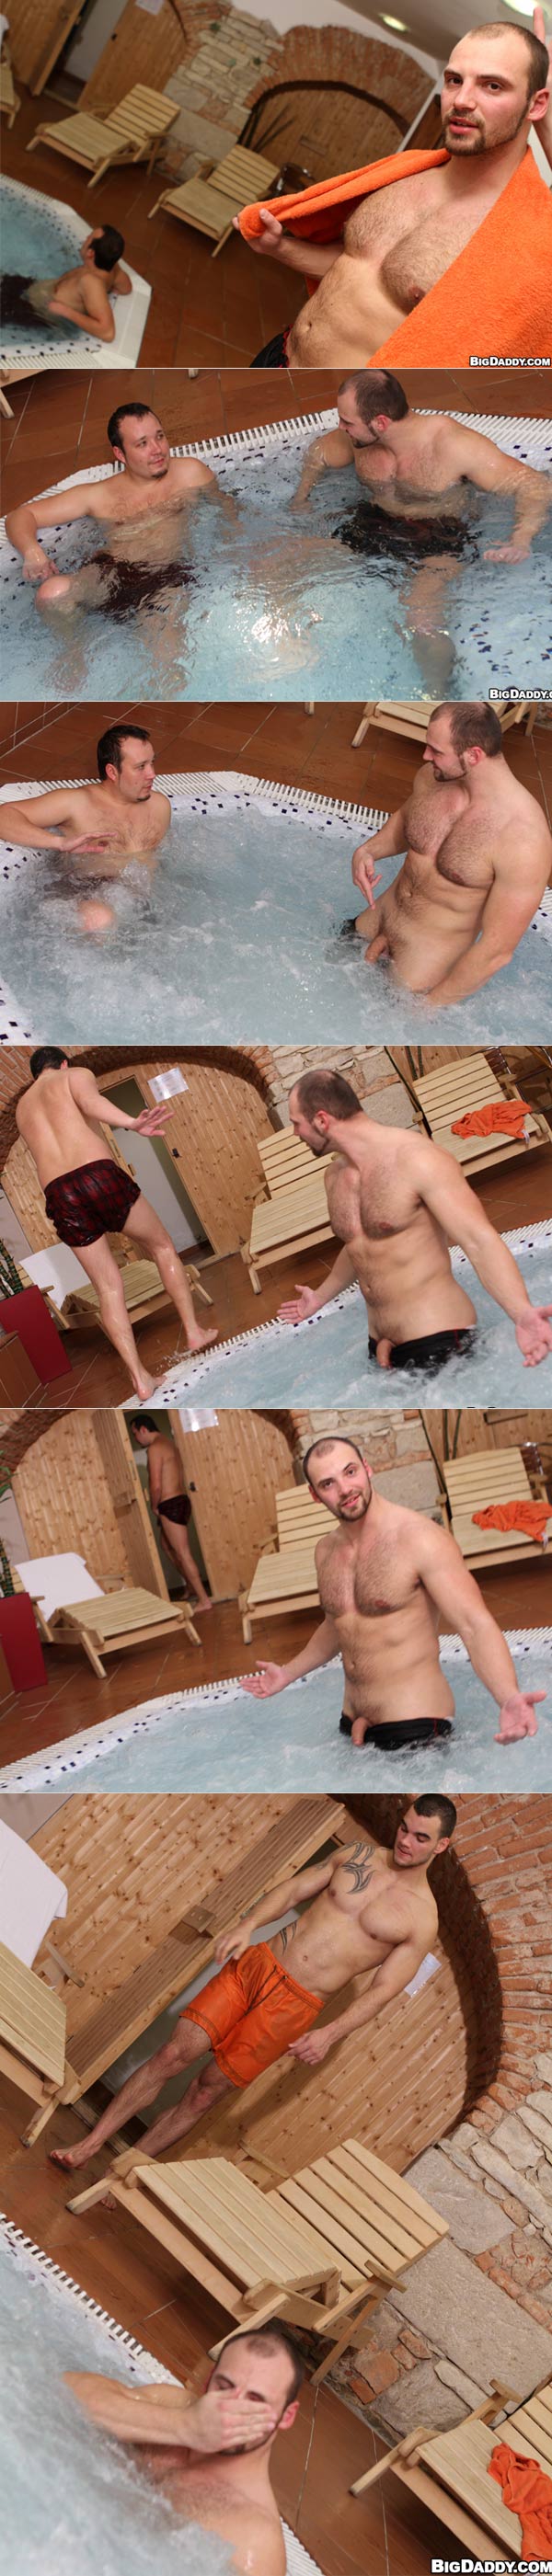 Anal Action At The Spa at OutInPublic